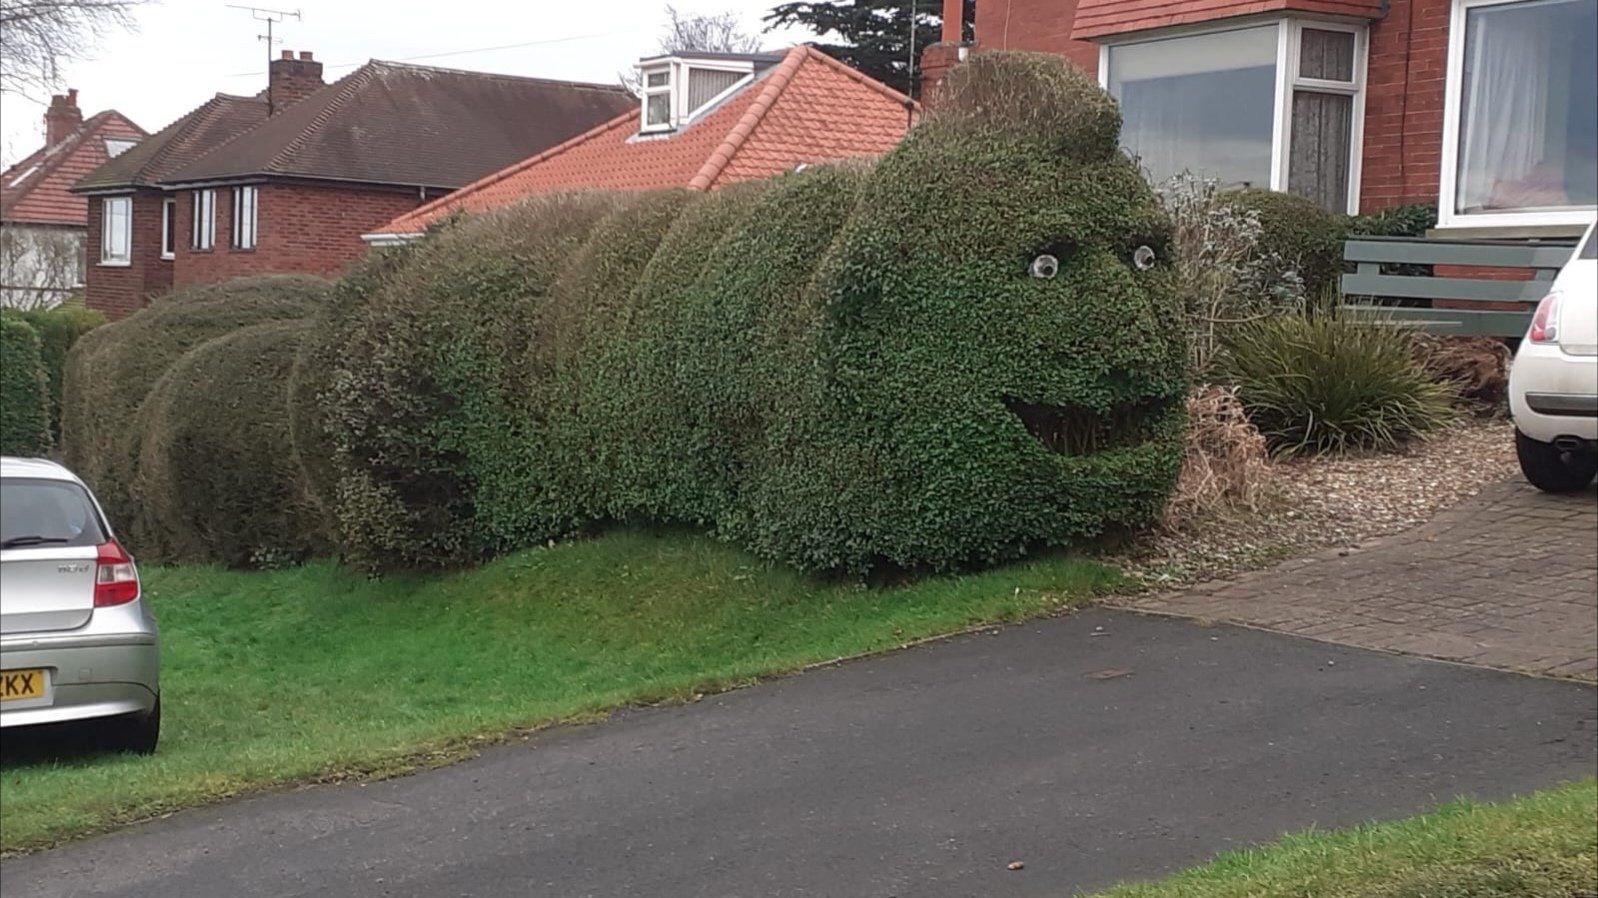 Walking around and saw this terrifying hedge